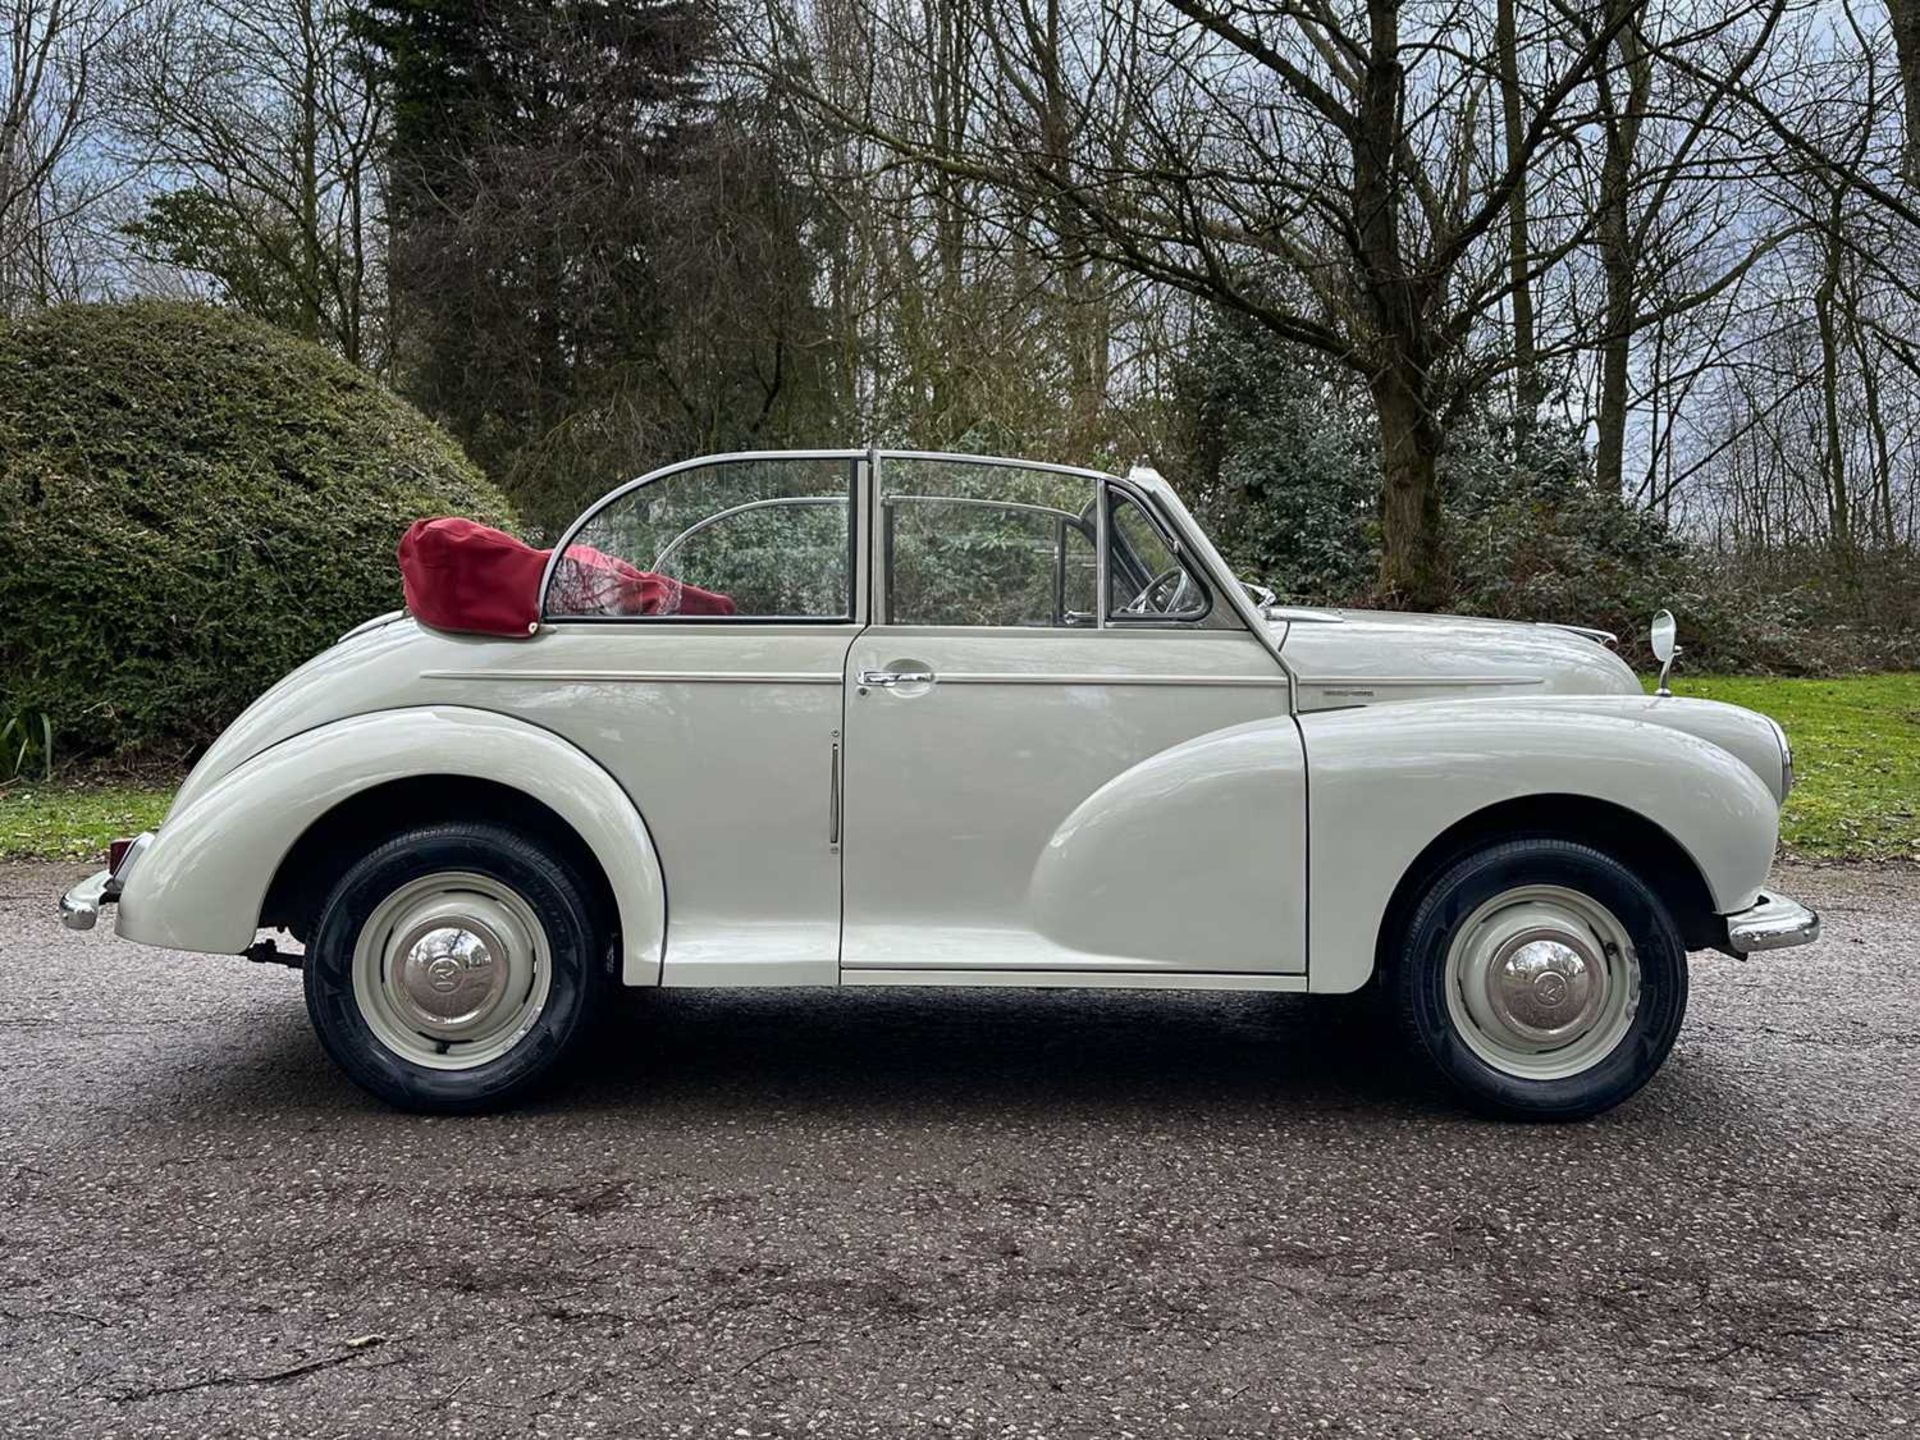 1954 Morris Minor Tourer Fully restored to concours standard - Image 13 of 100